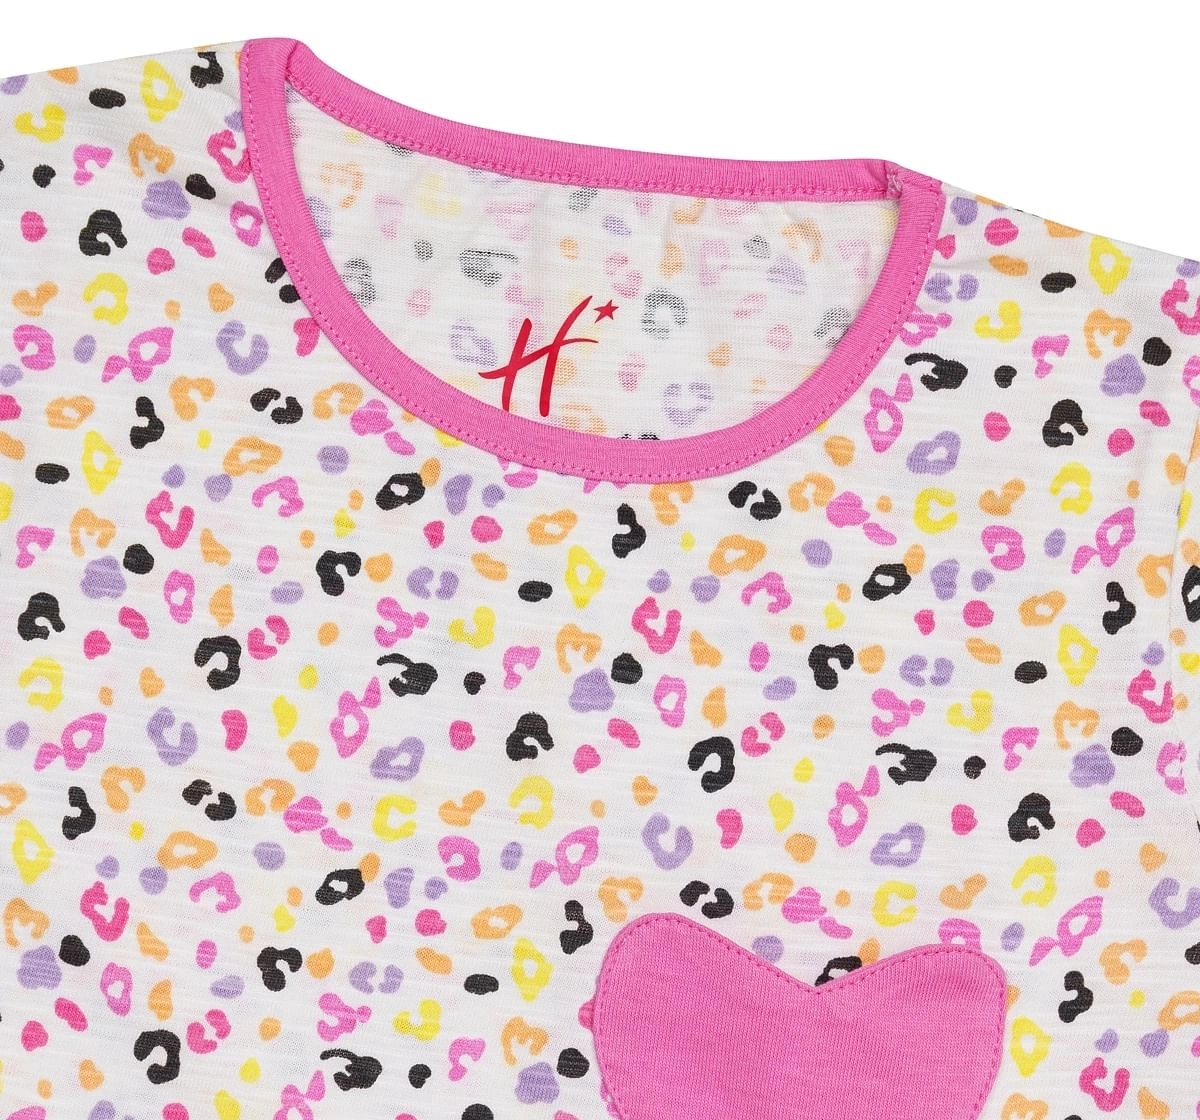 H by Hamleys Girls Short Sleeves Dress Candy Print with Heart Patch-White Multi